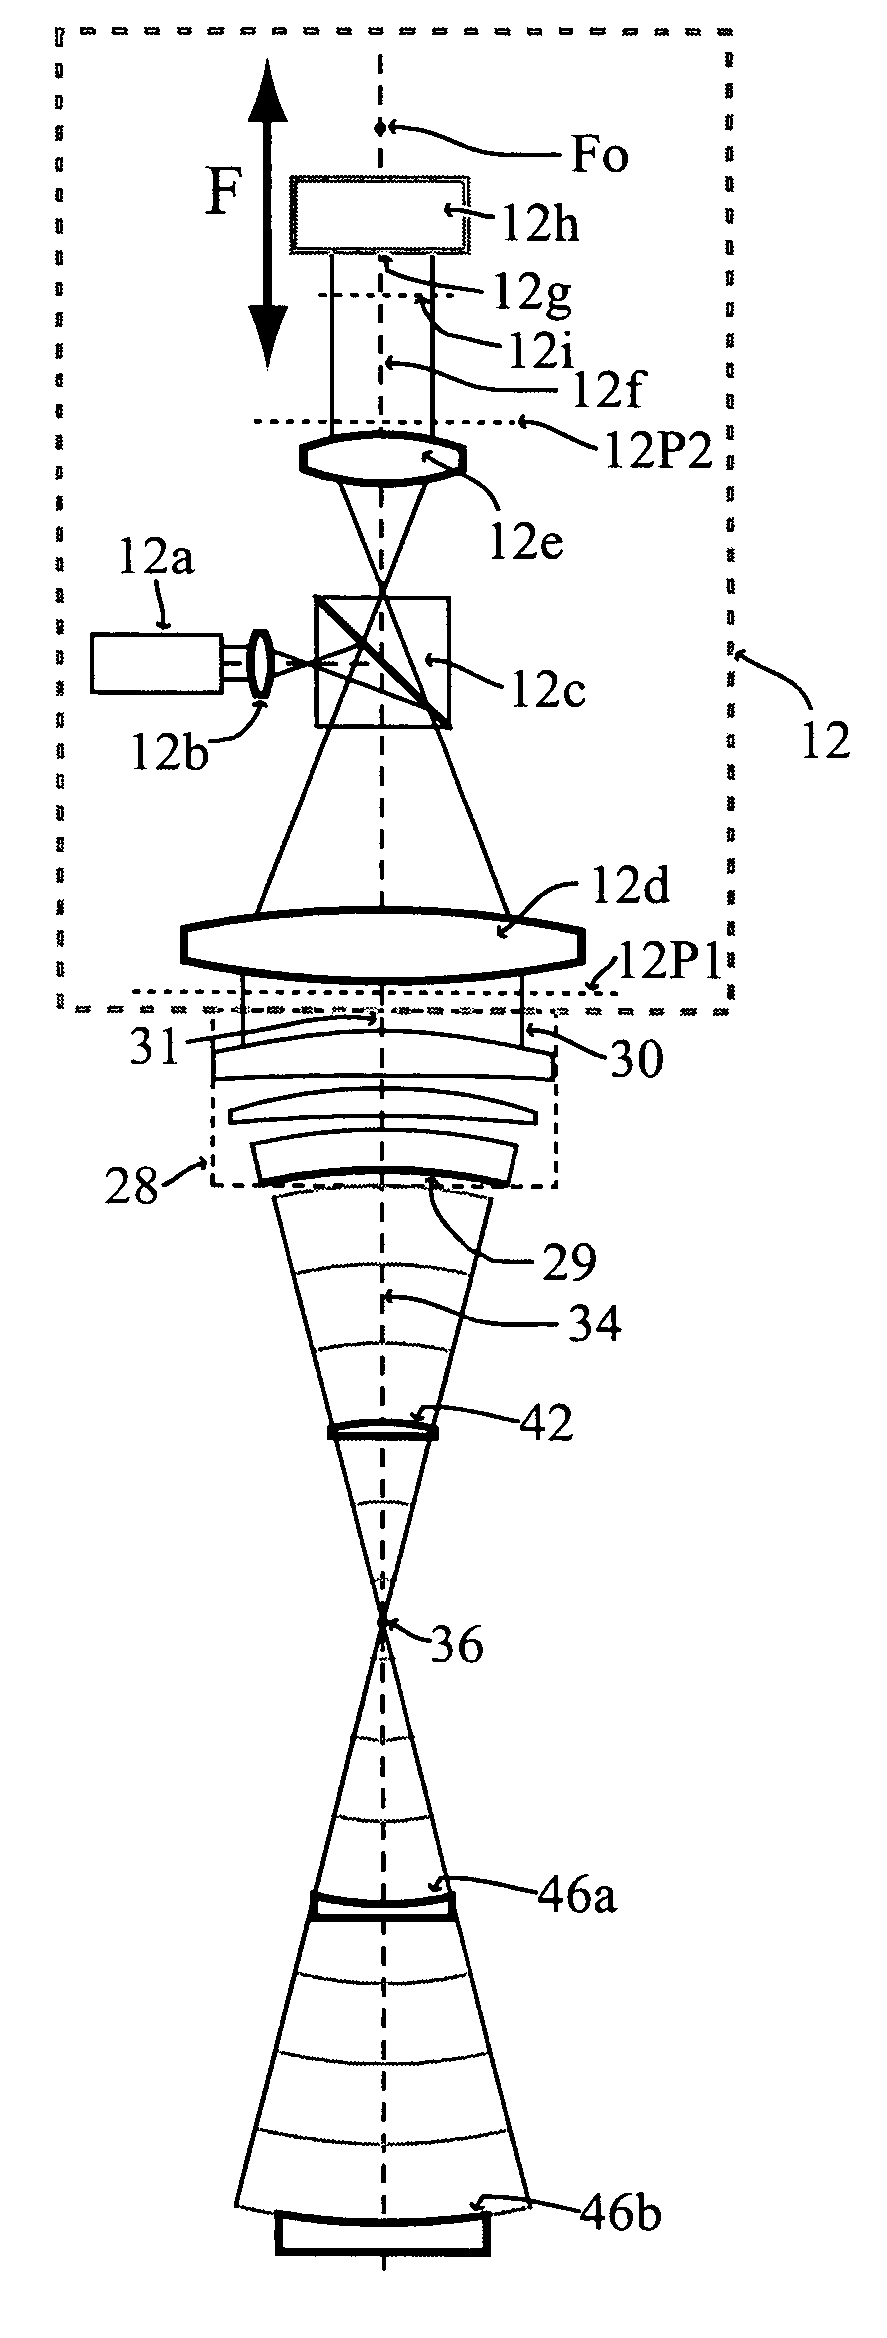 Method for accurate high-resolution measurements of aspheric surfaces